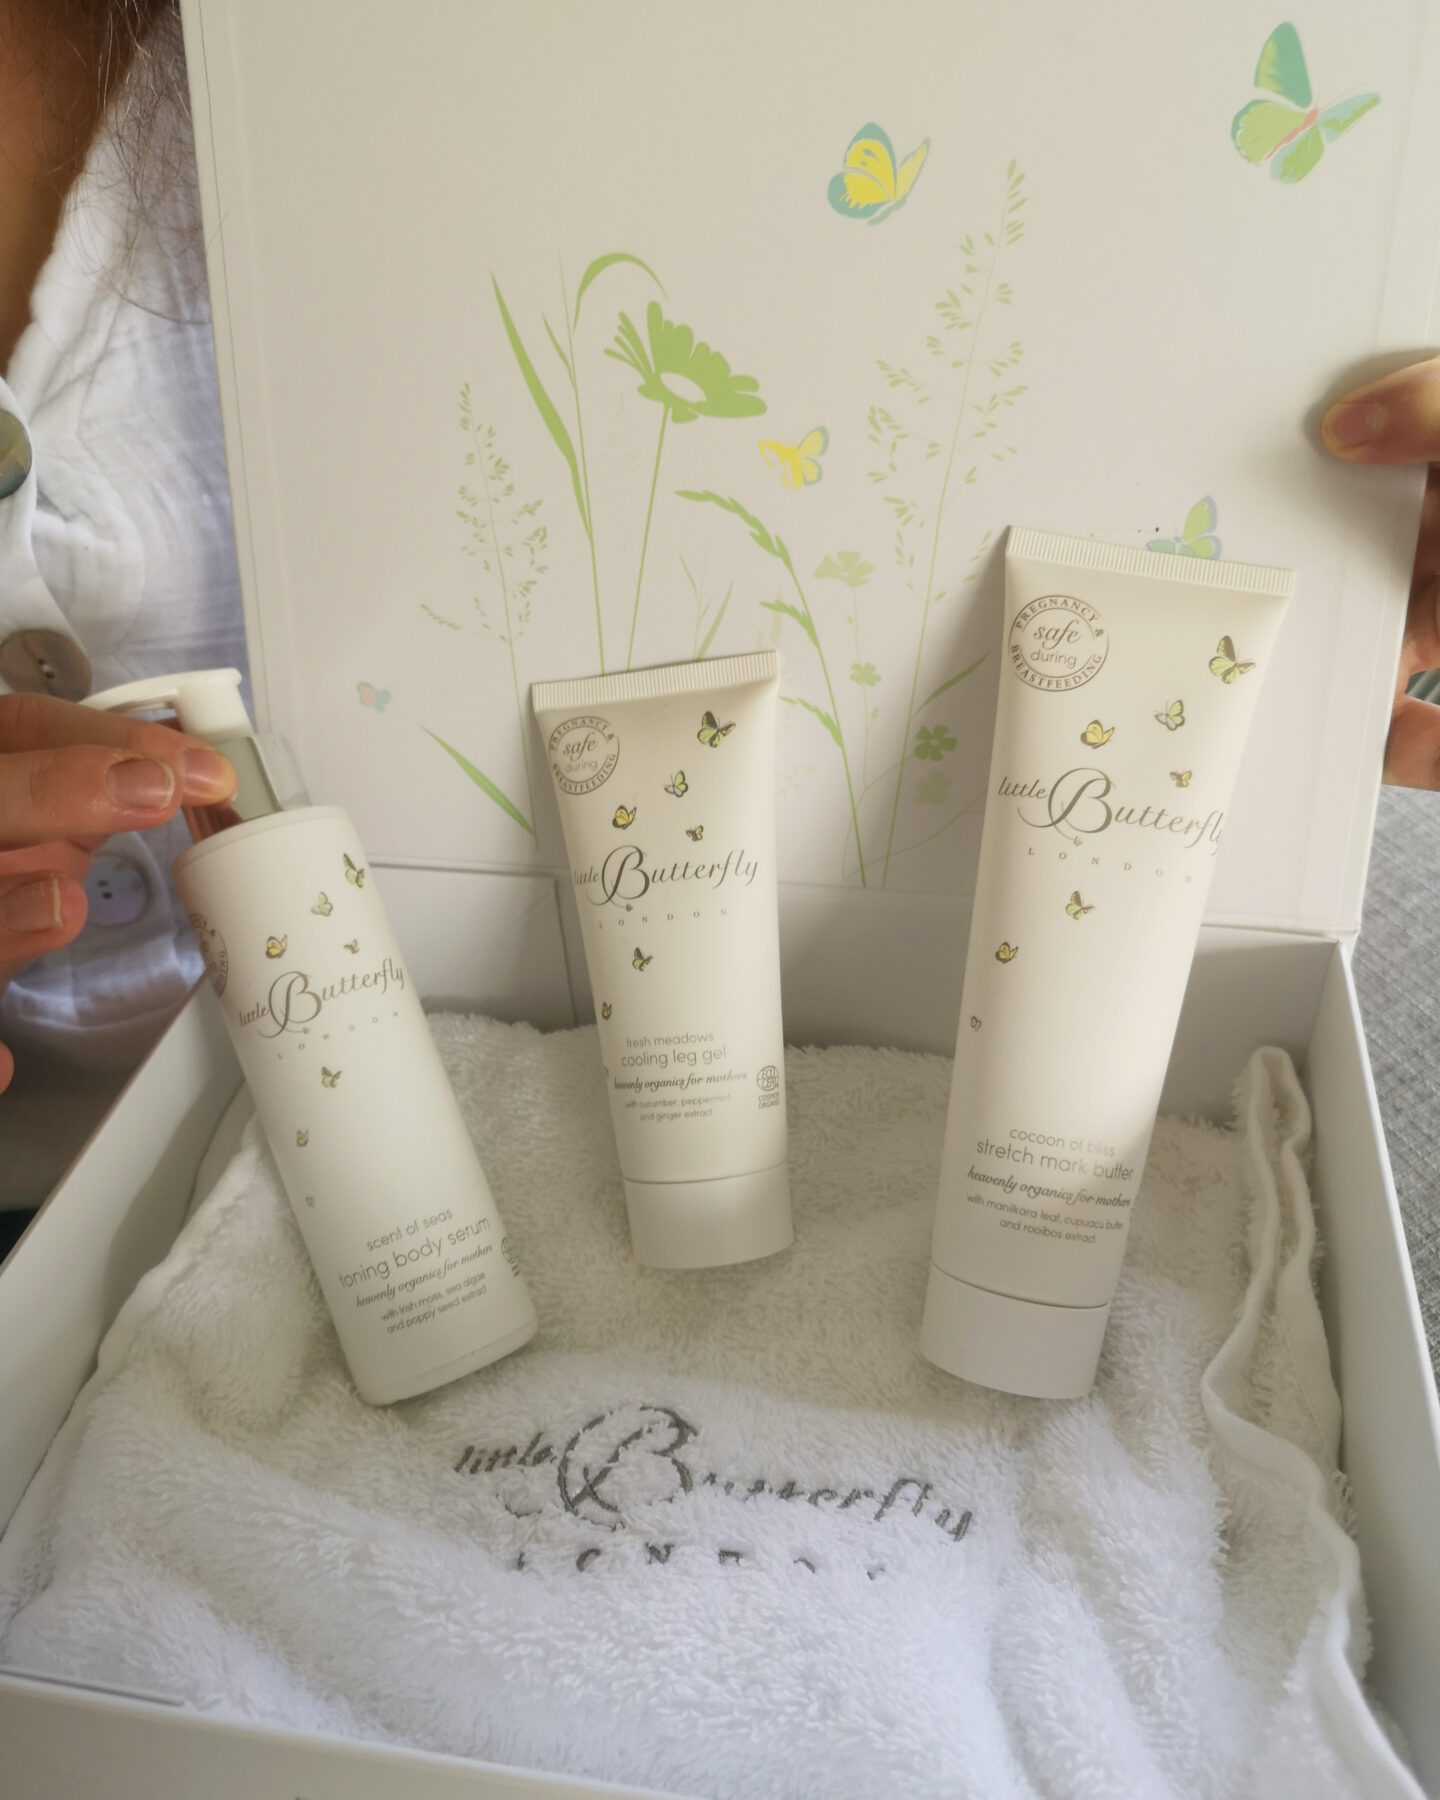 Little Butterfly Pamper Gift Box, Organic Beauty, Little Butterfly London, Luxury Beauty, Organic Skincare, Mother's Day Giveaway, Mother's Day Ideas, Mother's Day 2023, Win, competition, Organic Well-Being, Pampering, Mum Gift, Giveaway, the Frenchie Mummy